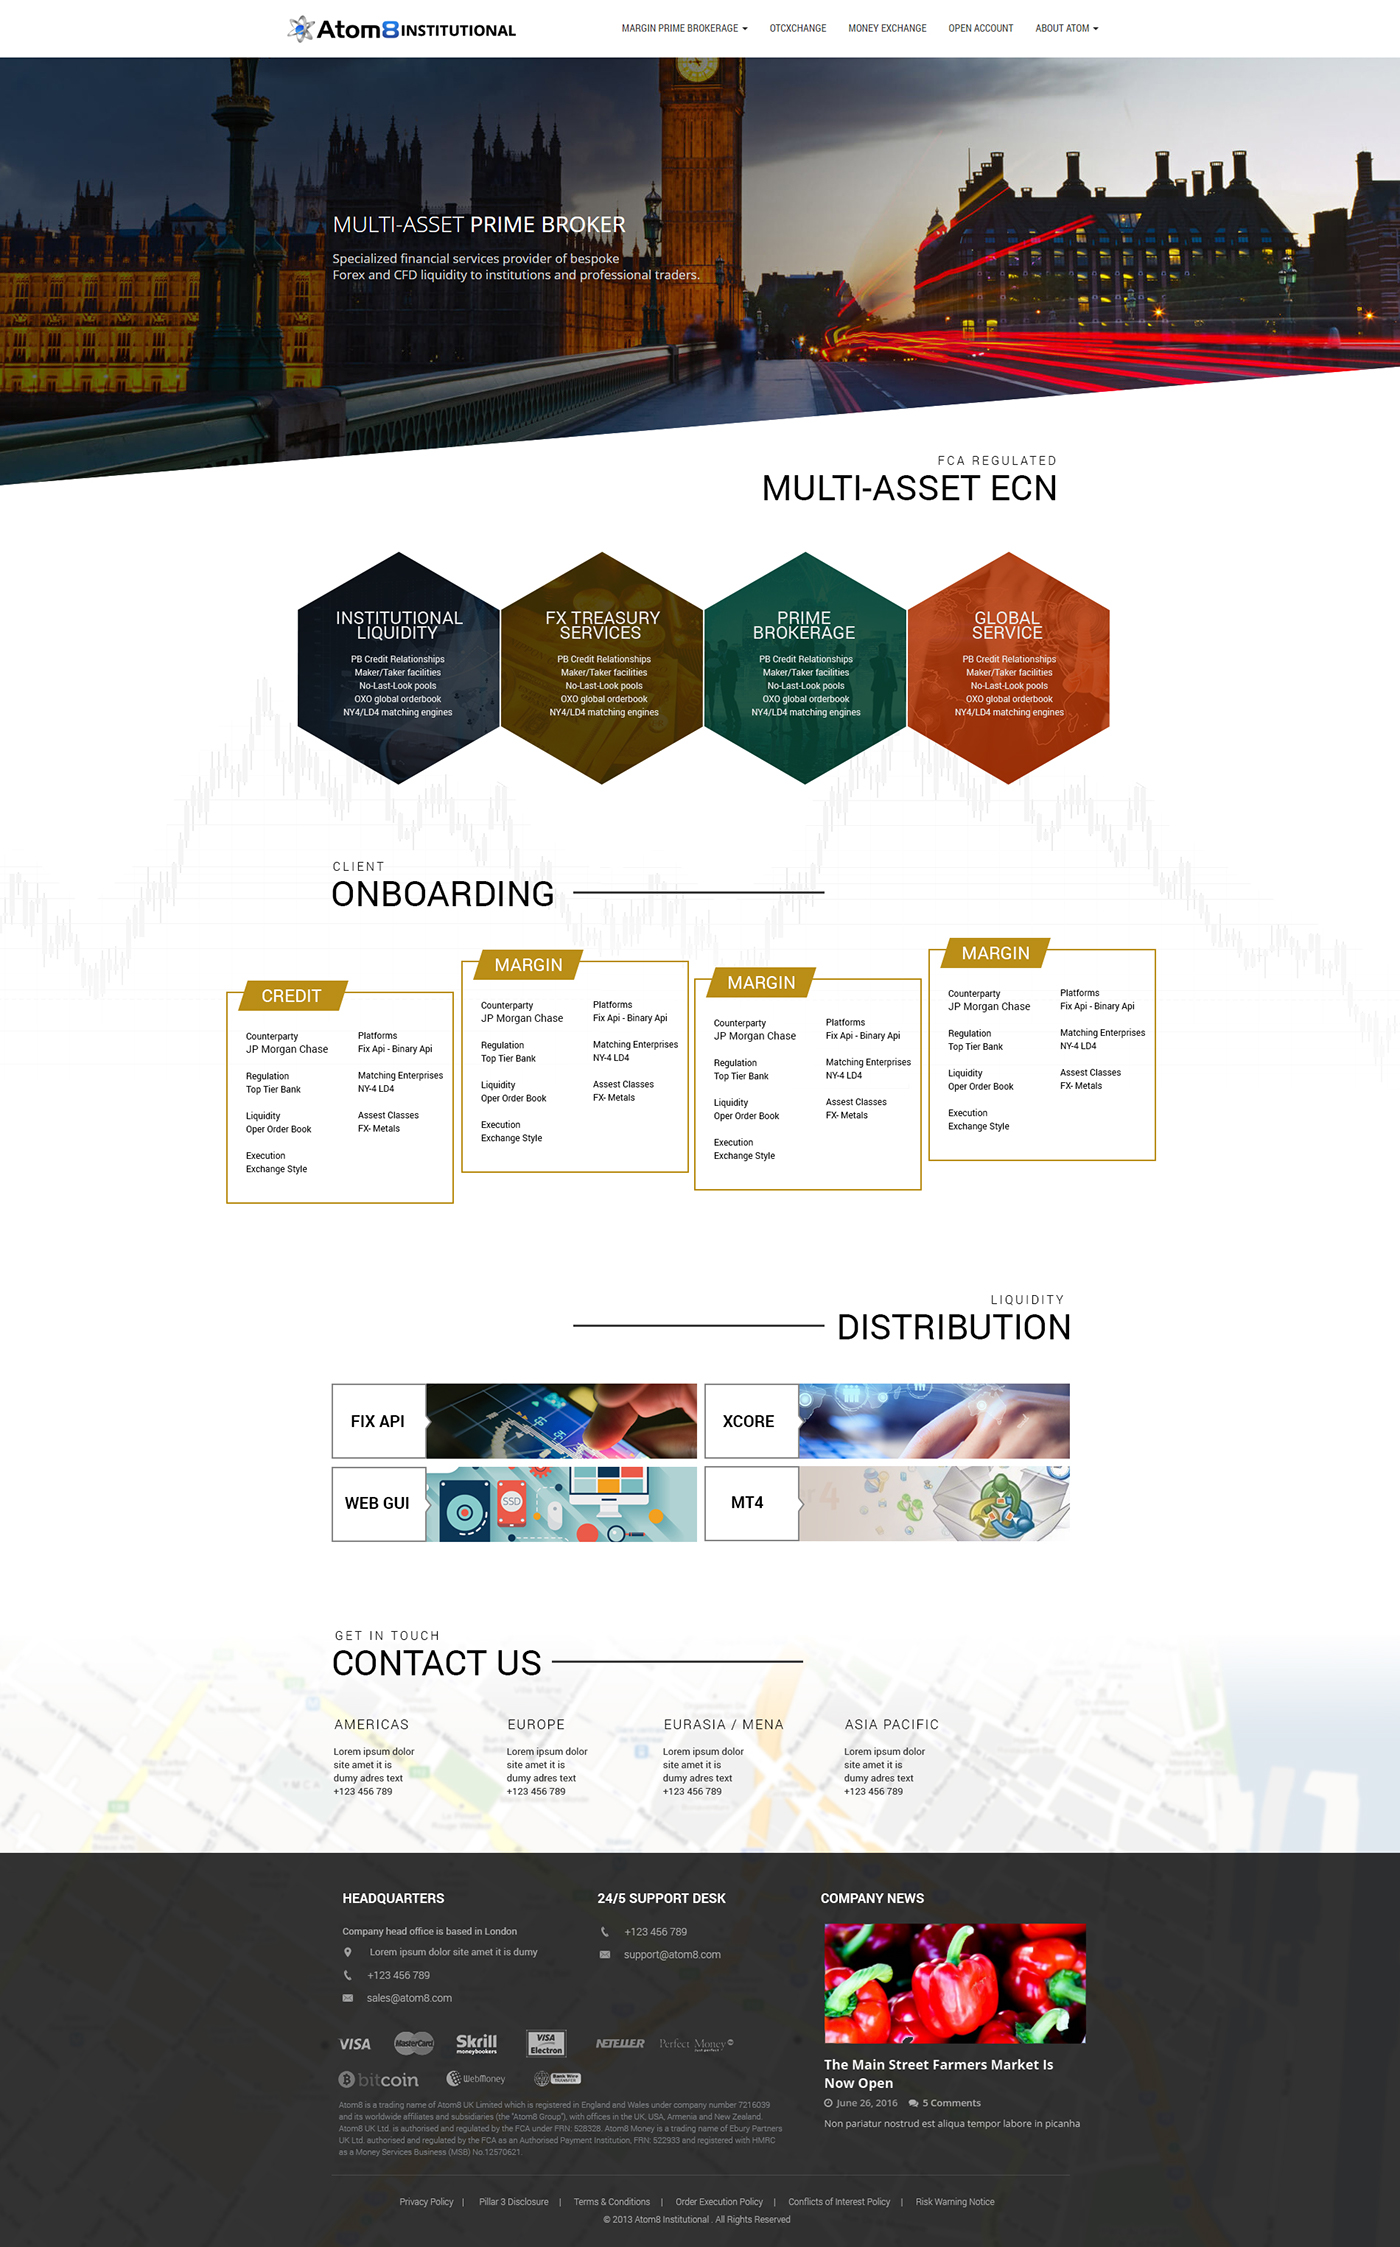 Atom8 Institutional Forex Trading Website Template on Behance